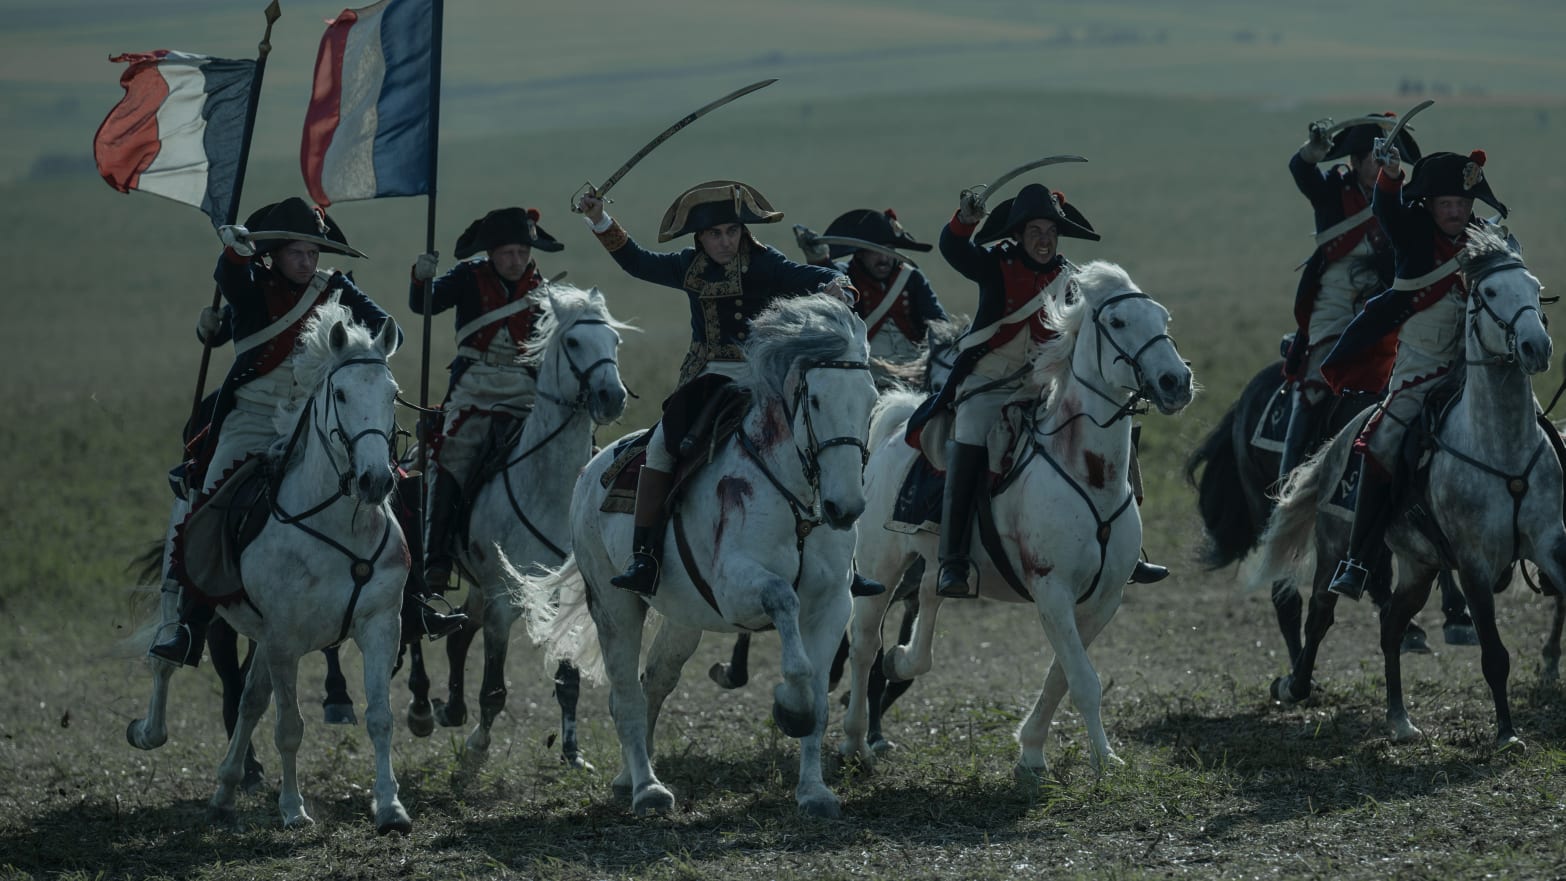 Joaquin Phoenix and an army of men on horses in a scene from 'Napoleon'